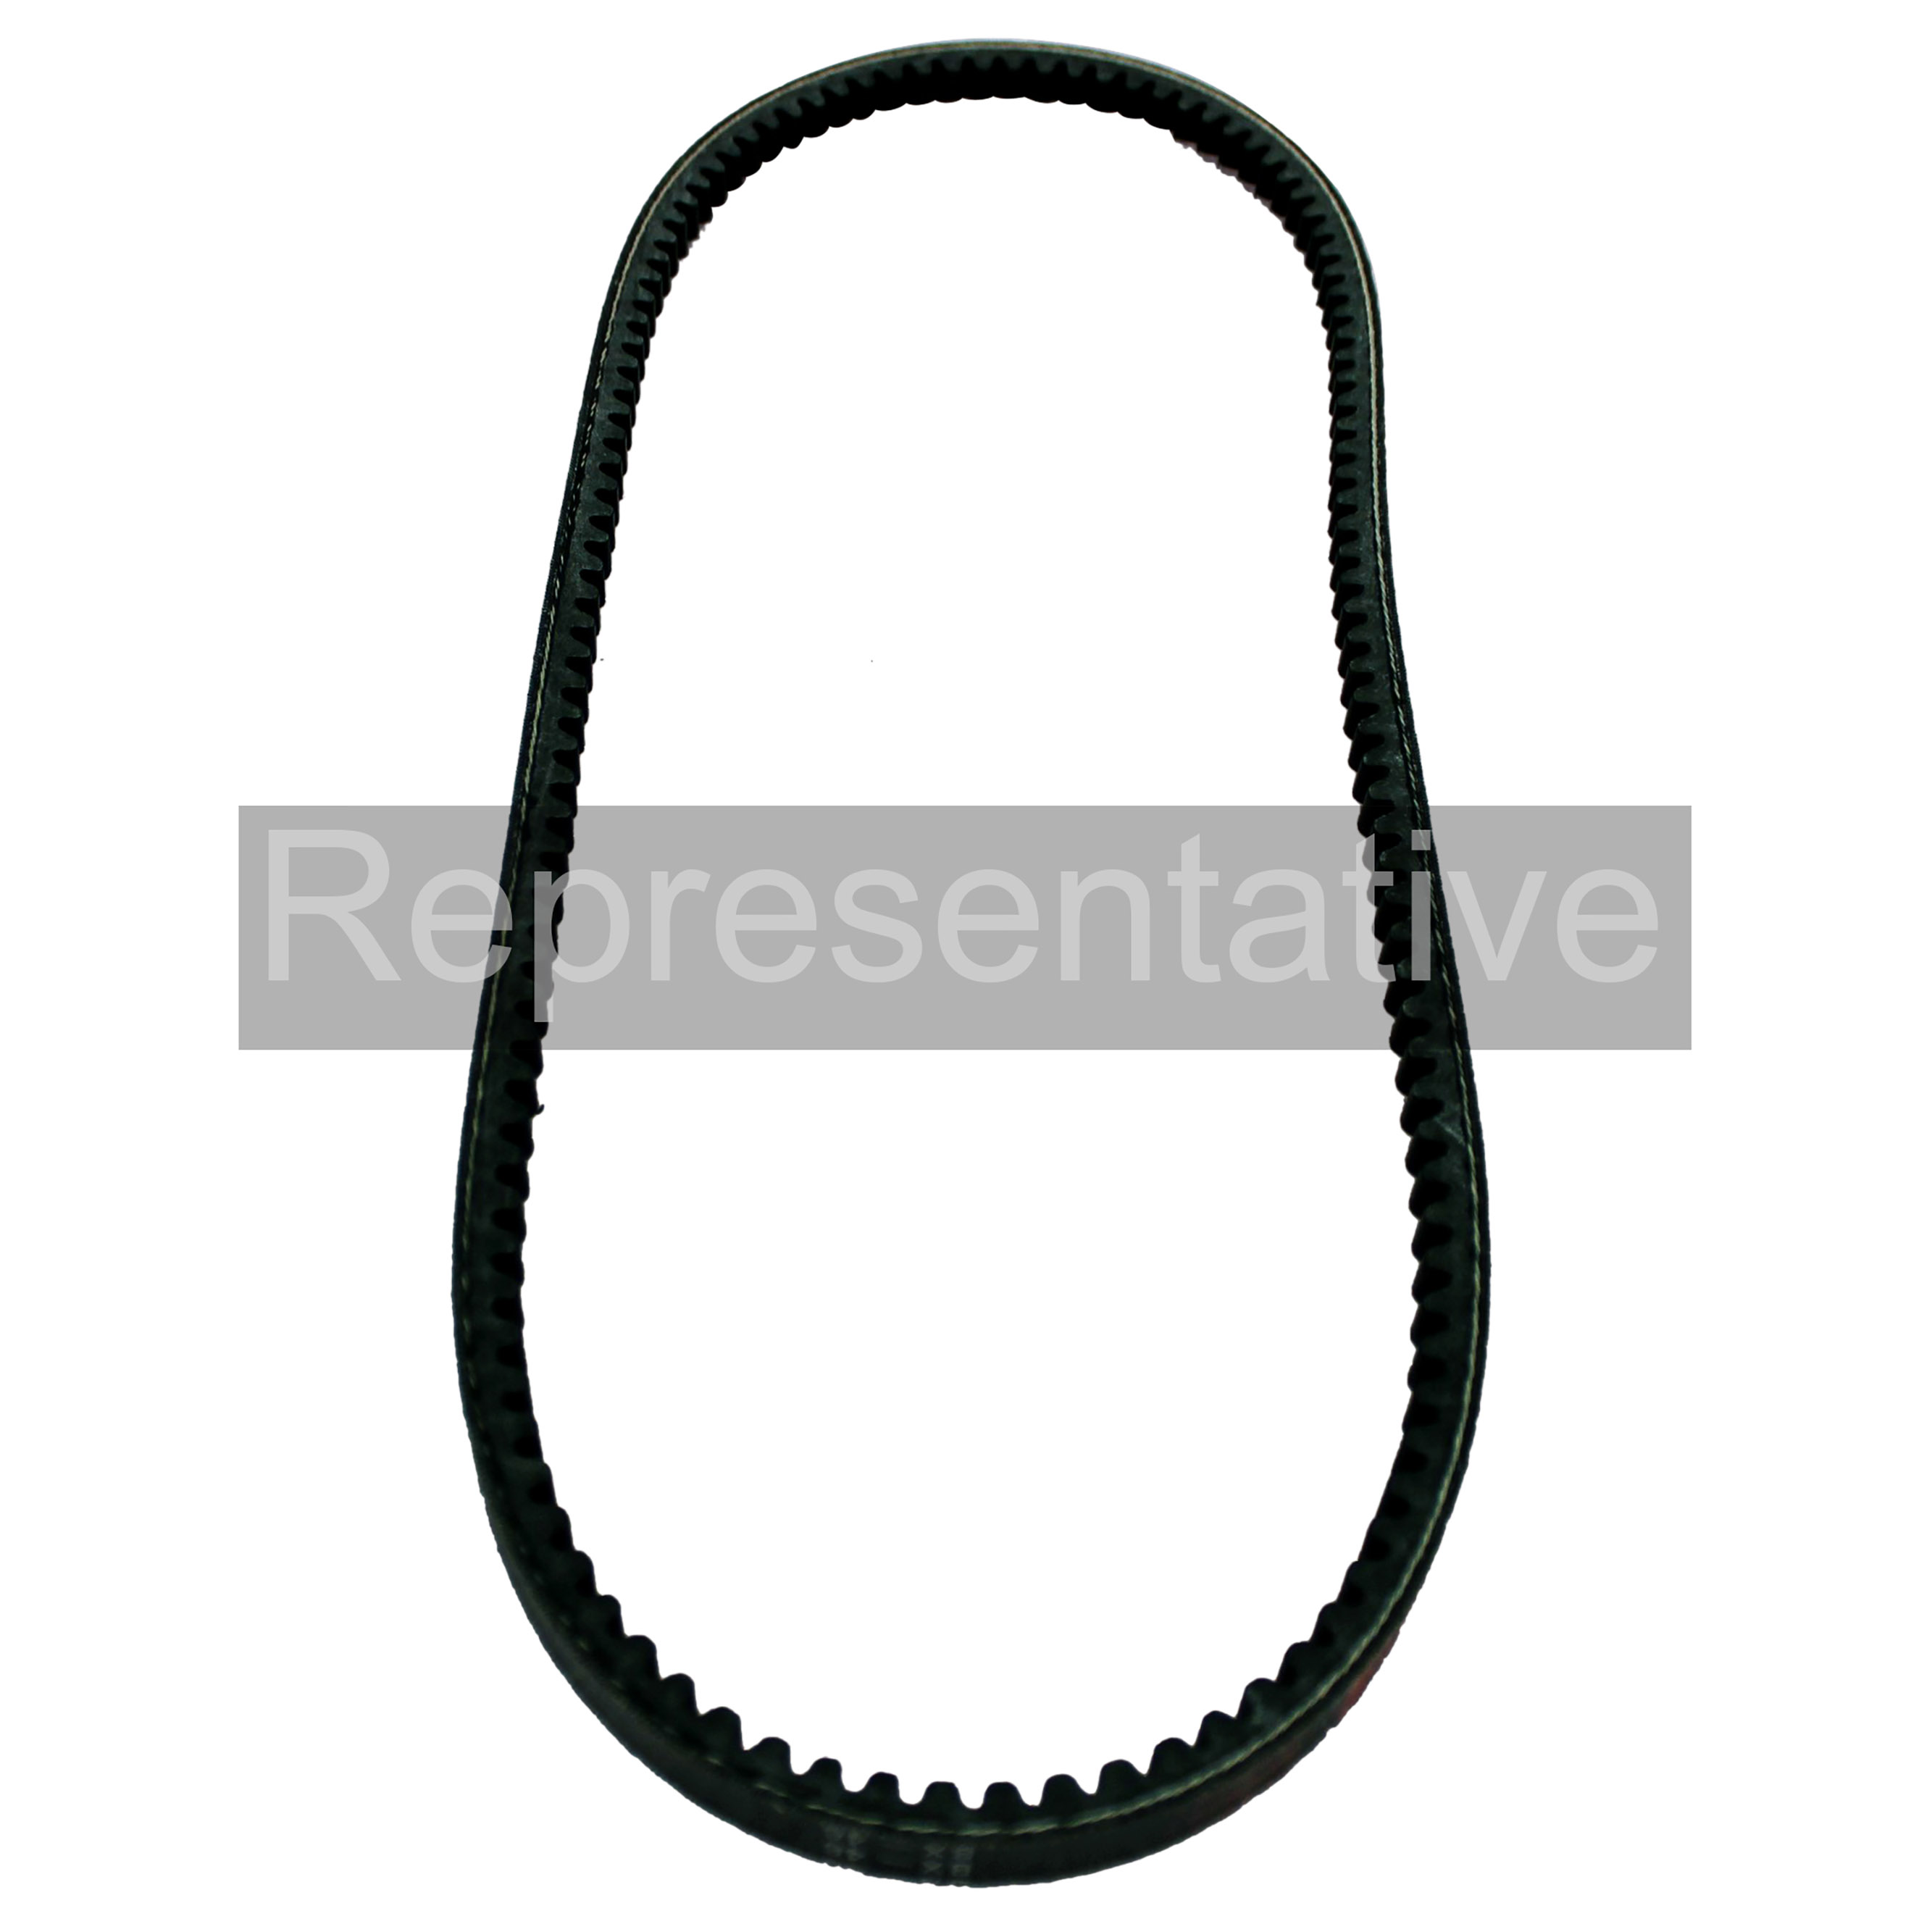 14 mm Pitch Poly Carbon 85 Teeth Browning B14MHC-1190-37 HPT-Chain Belts 37 mm Belt Width